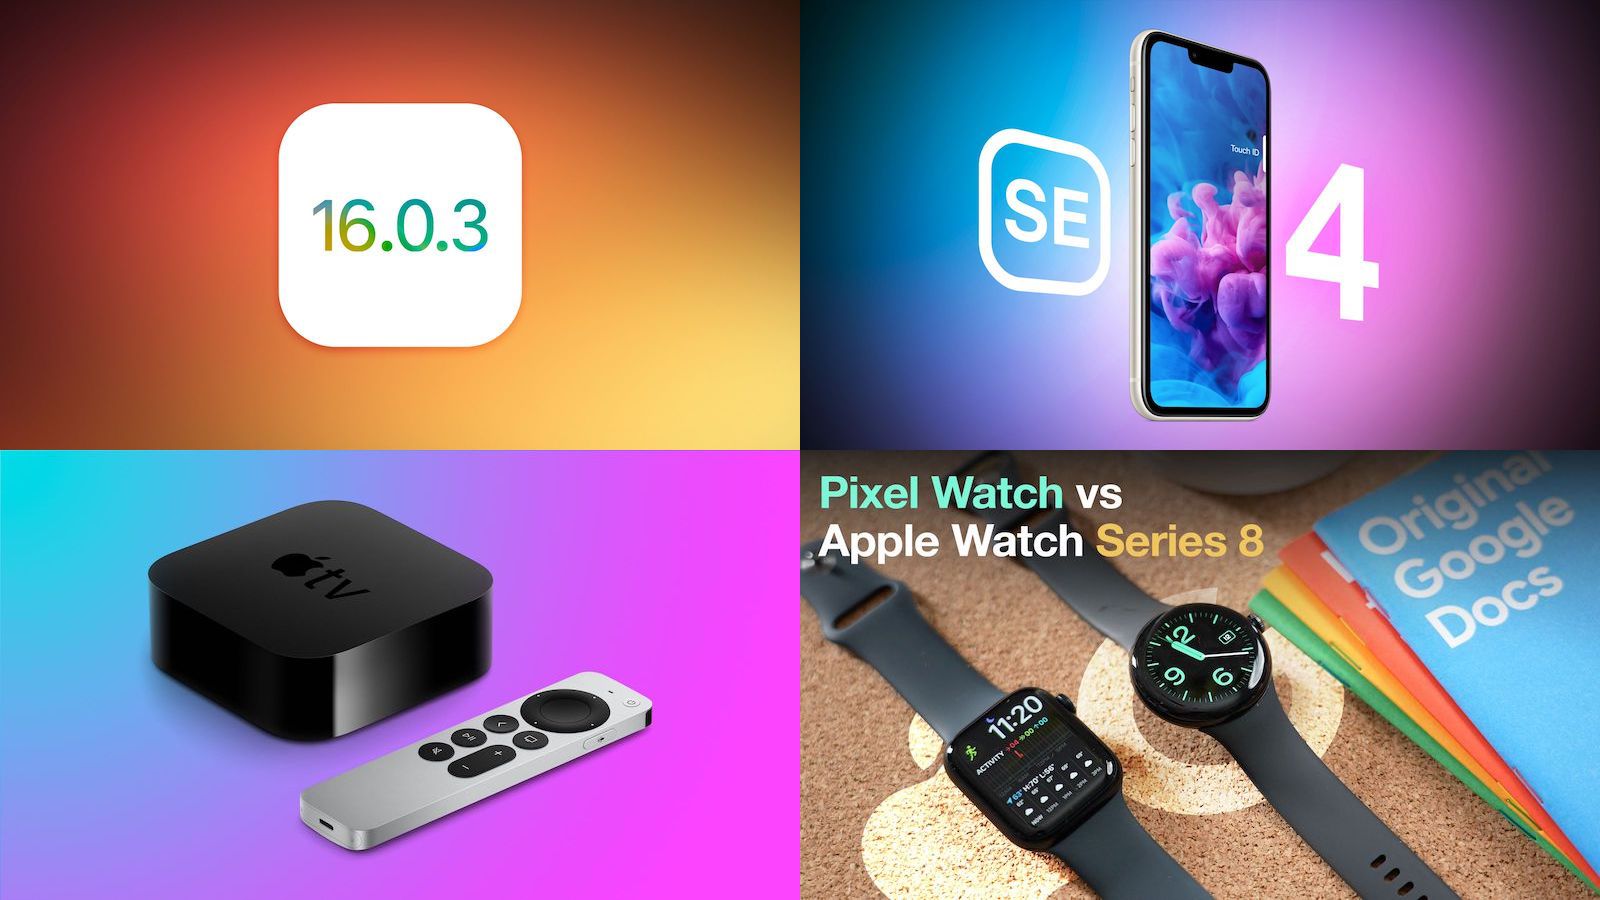 Top Stories: iOS 16.0.3 Released, iPhone SE 4 and Apple TV Rumors, and More